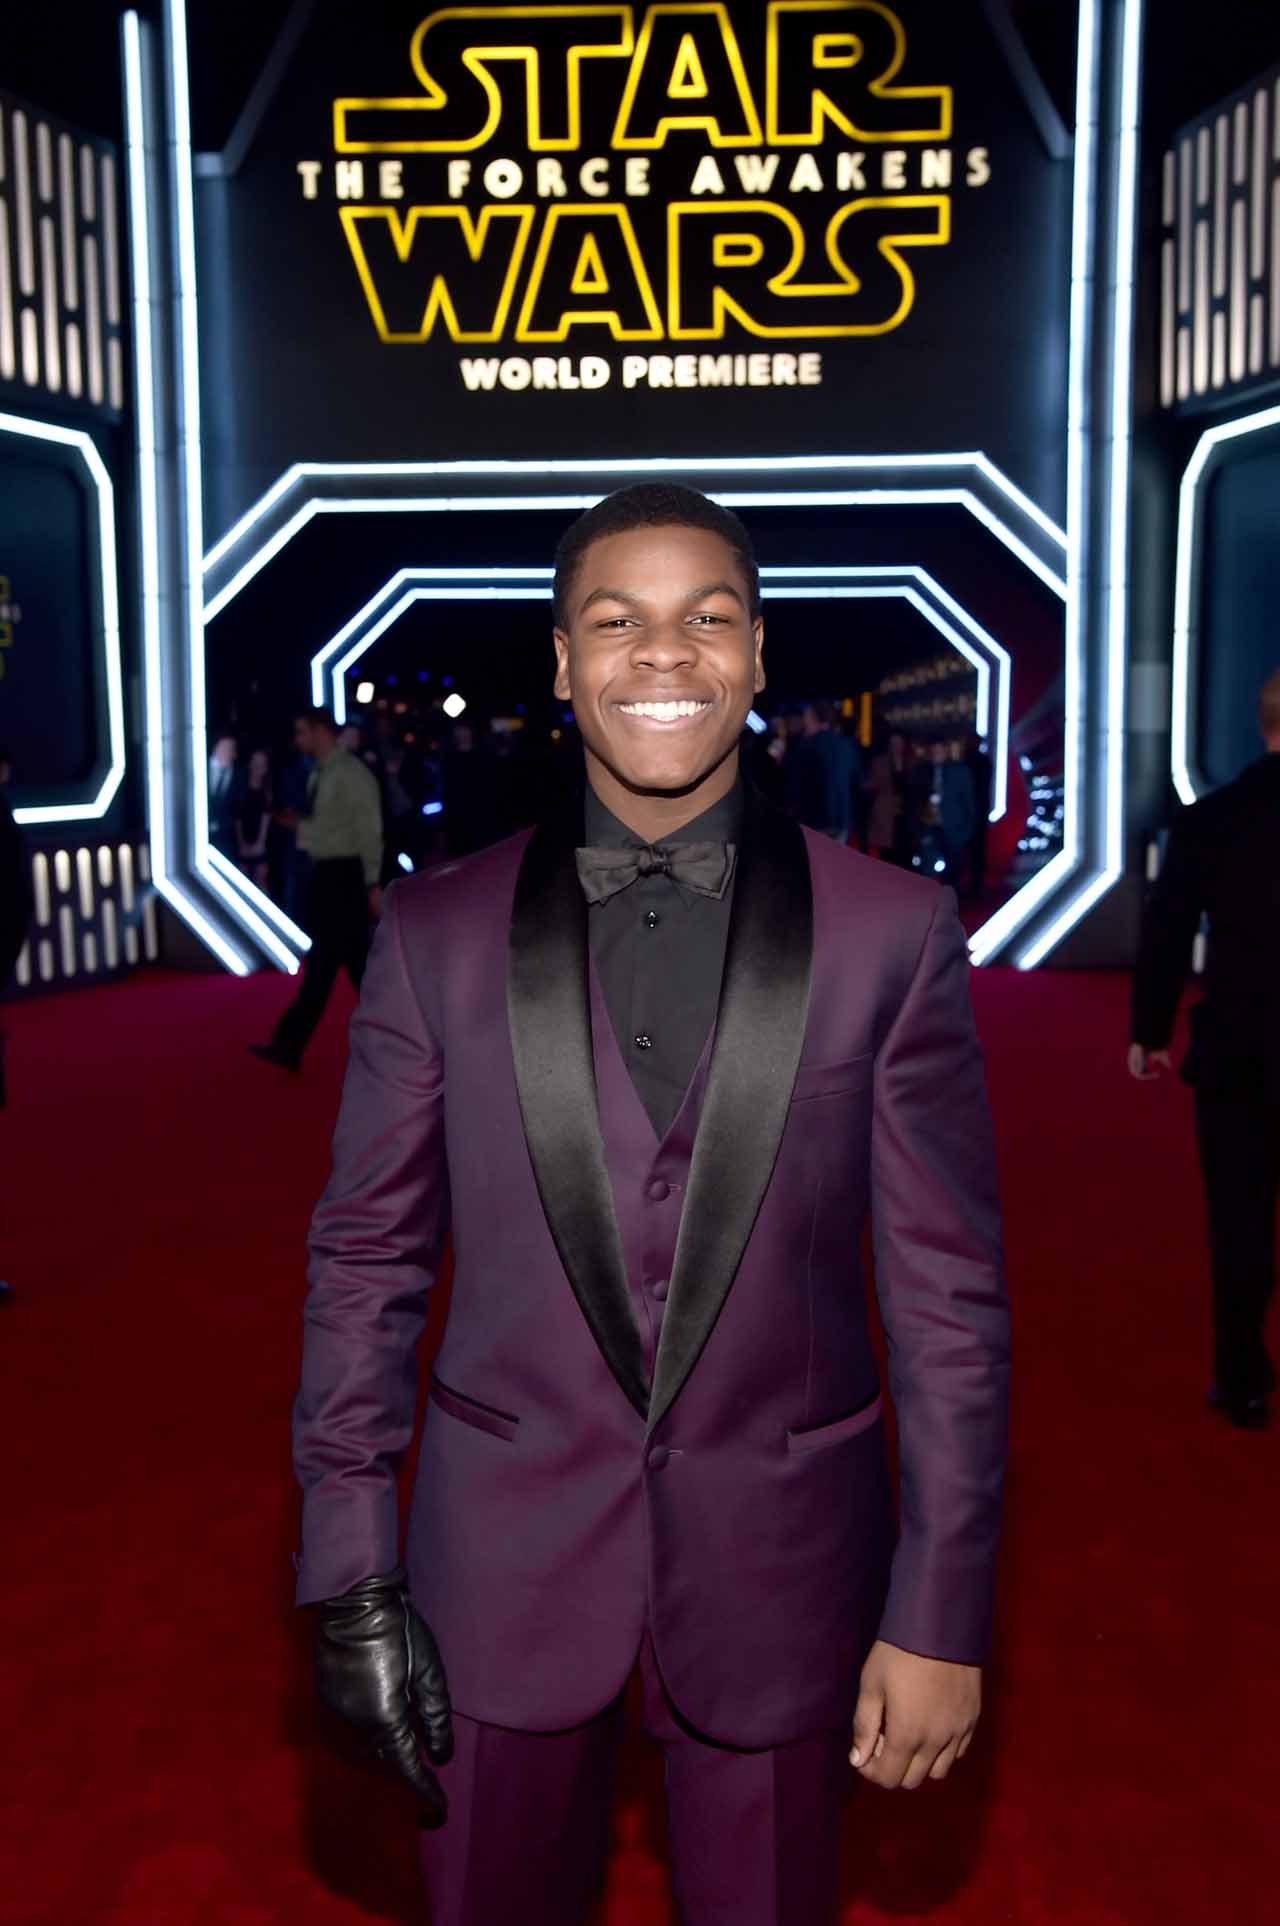 HOLLYWOOD, CA - DECEMBER 14:  Actor John Boyega attends the World Premiere of ?Star Wars: The Force Awakens? at the Dolby, El Capitan, and TCL Theatres on December 14, 2015 in Hollywood, California.  (Photo by Alberto E. Rodriguez/Getty Images for Disney) *** Local Caption *** John Boyega